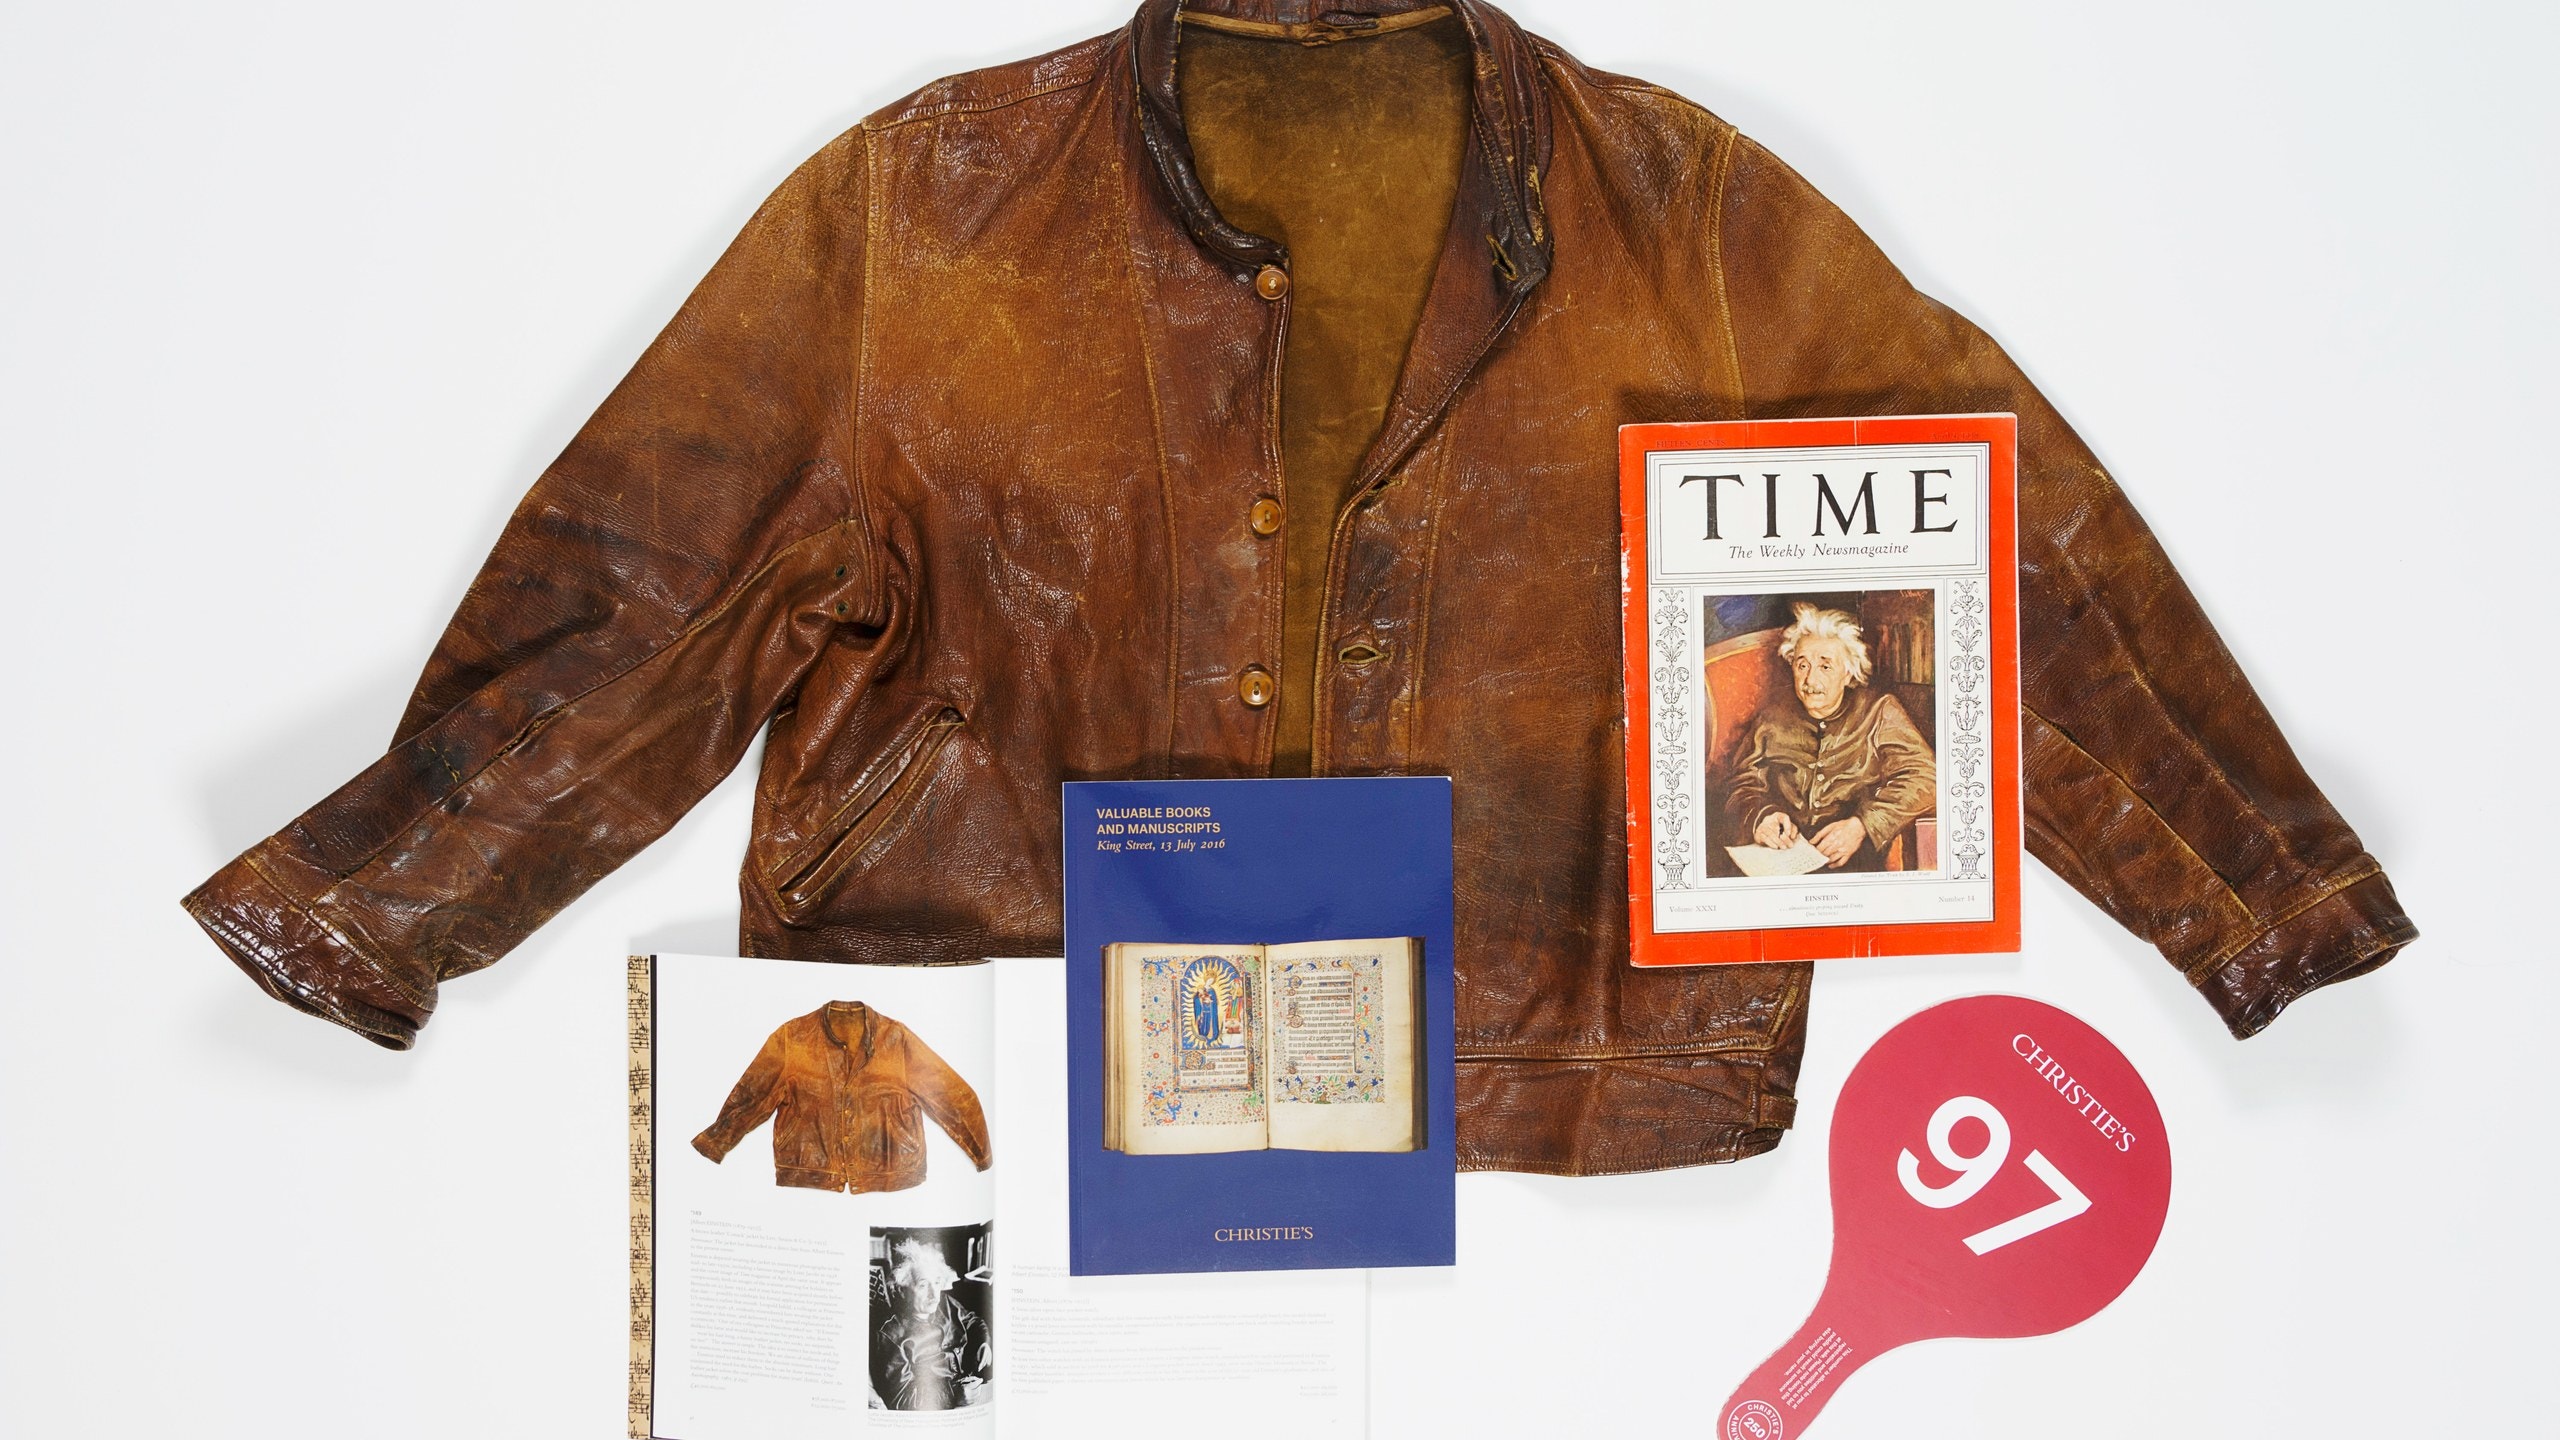 This Might Be the Most Famous Jacket in Levi’s History – The Weekly Rundown